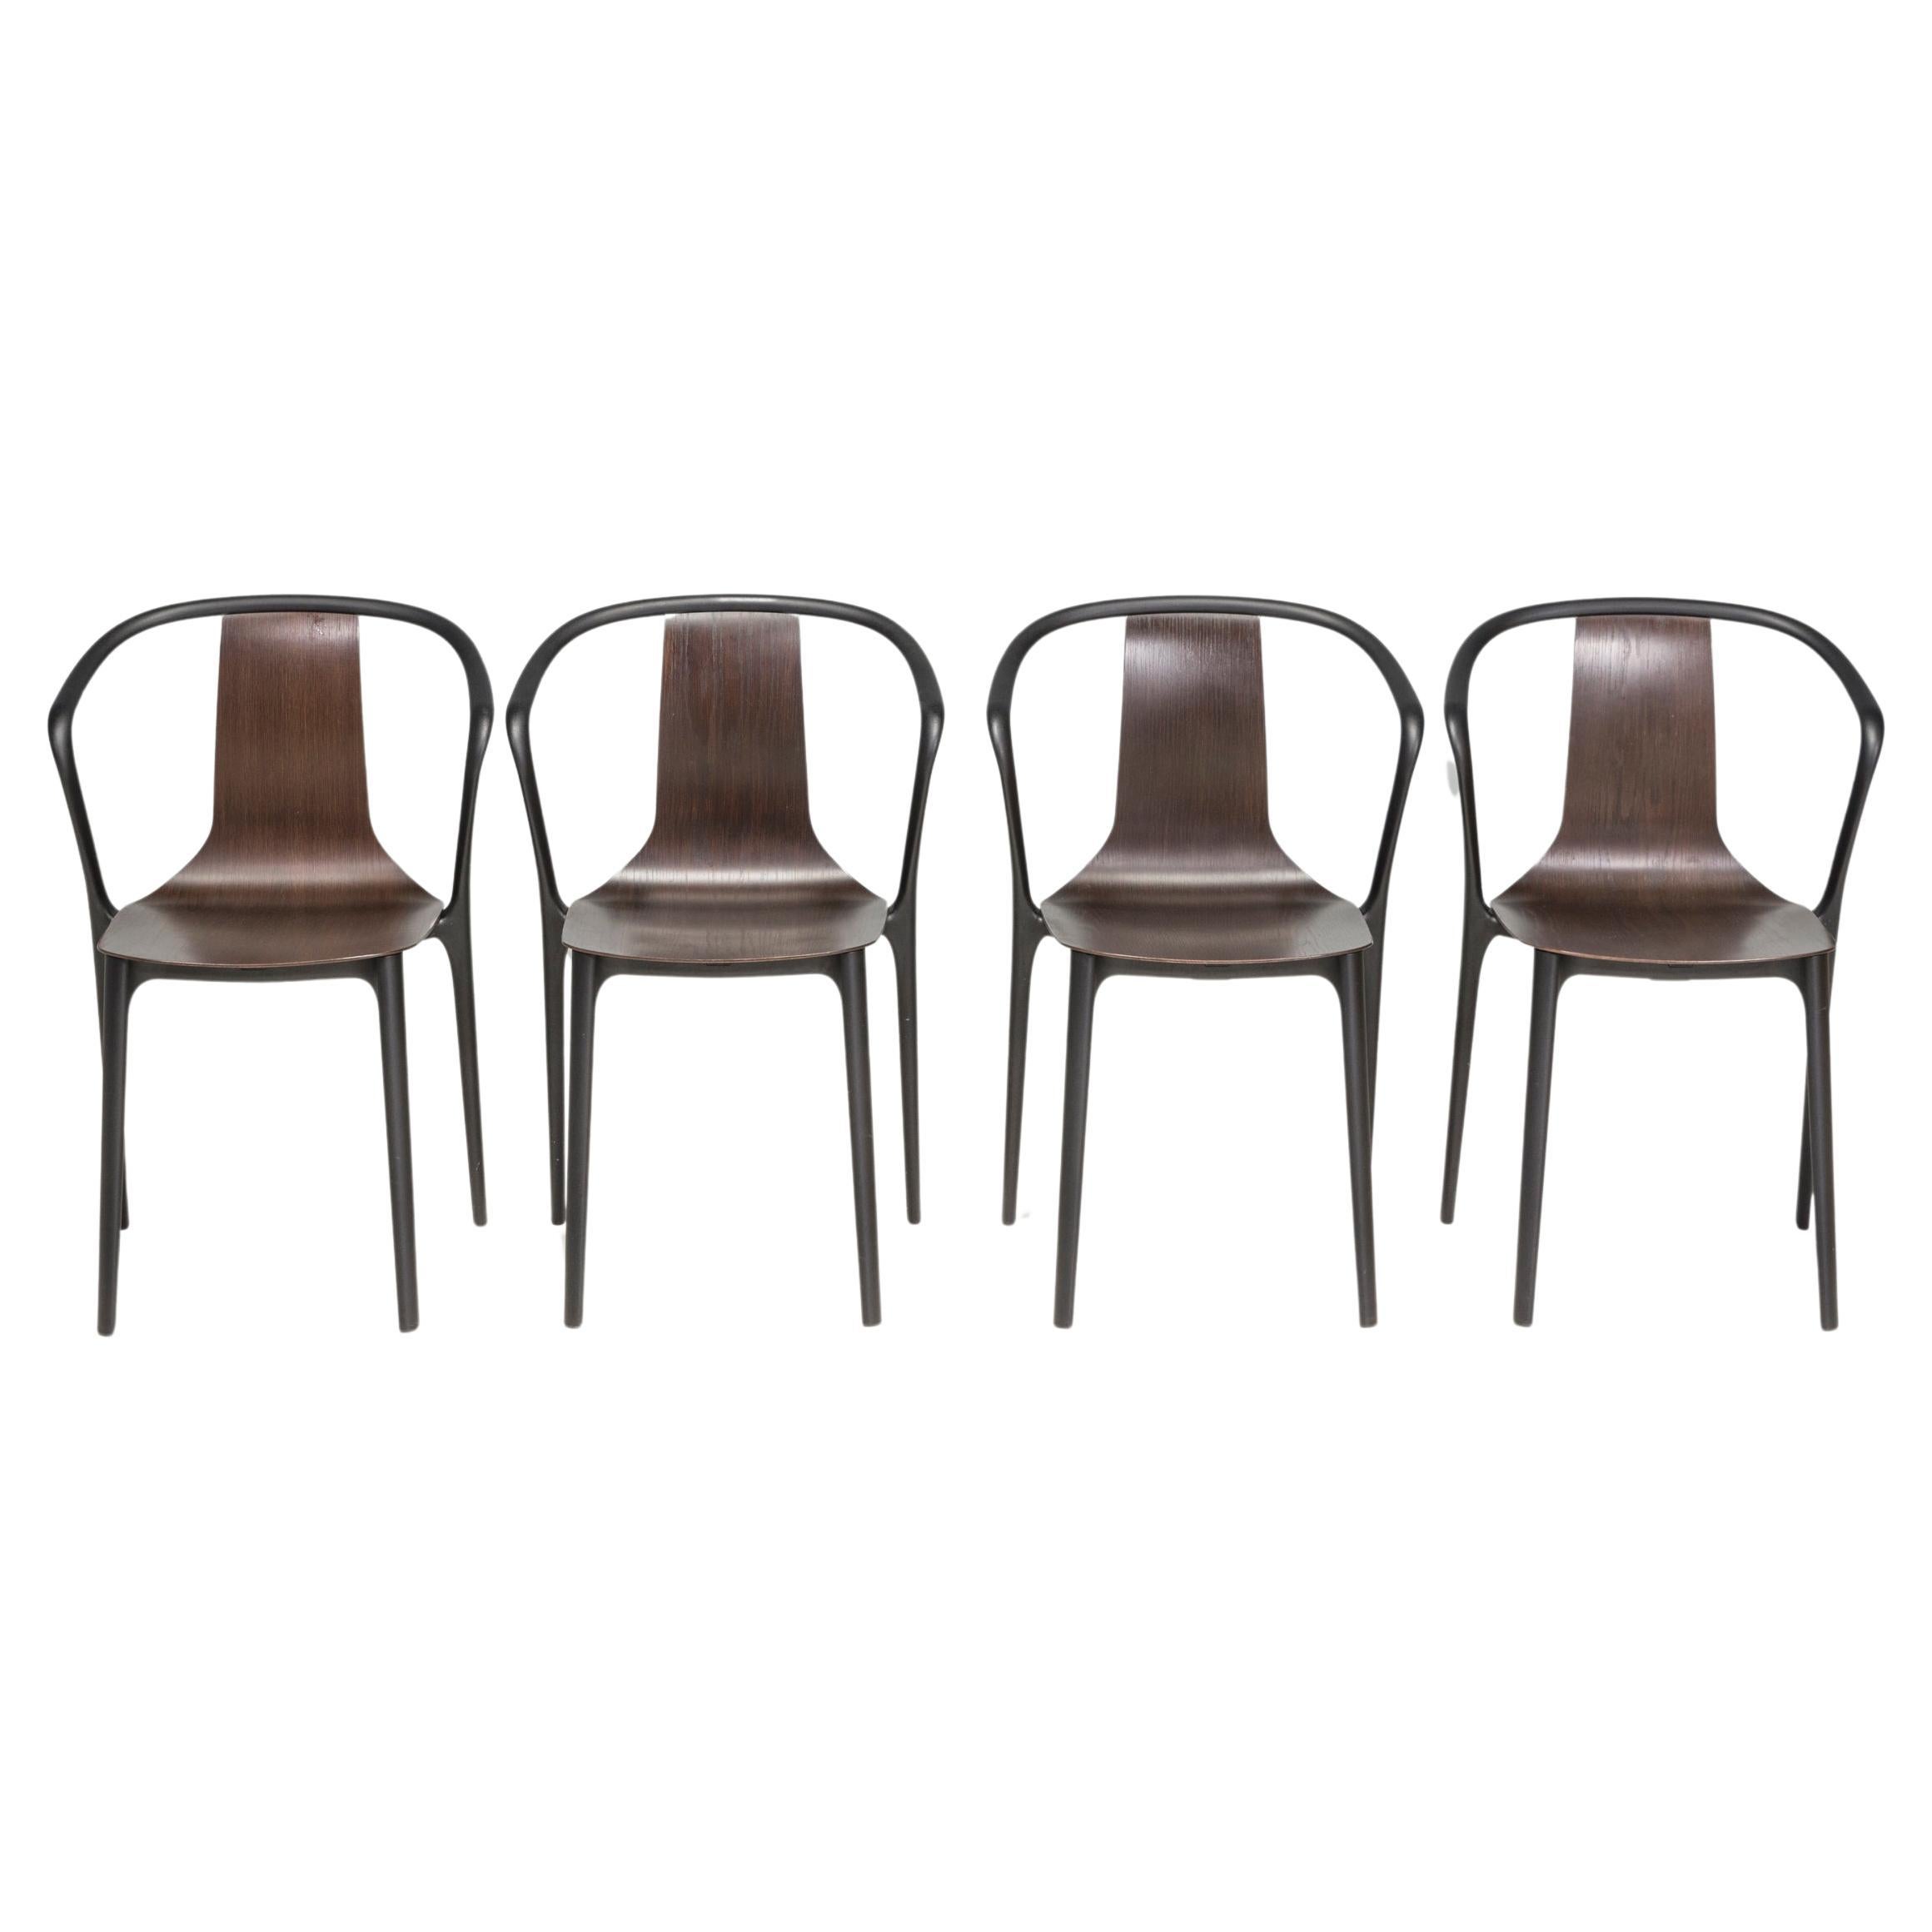 Ronan and Erwan Bouroullec Dining Room Chairs